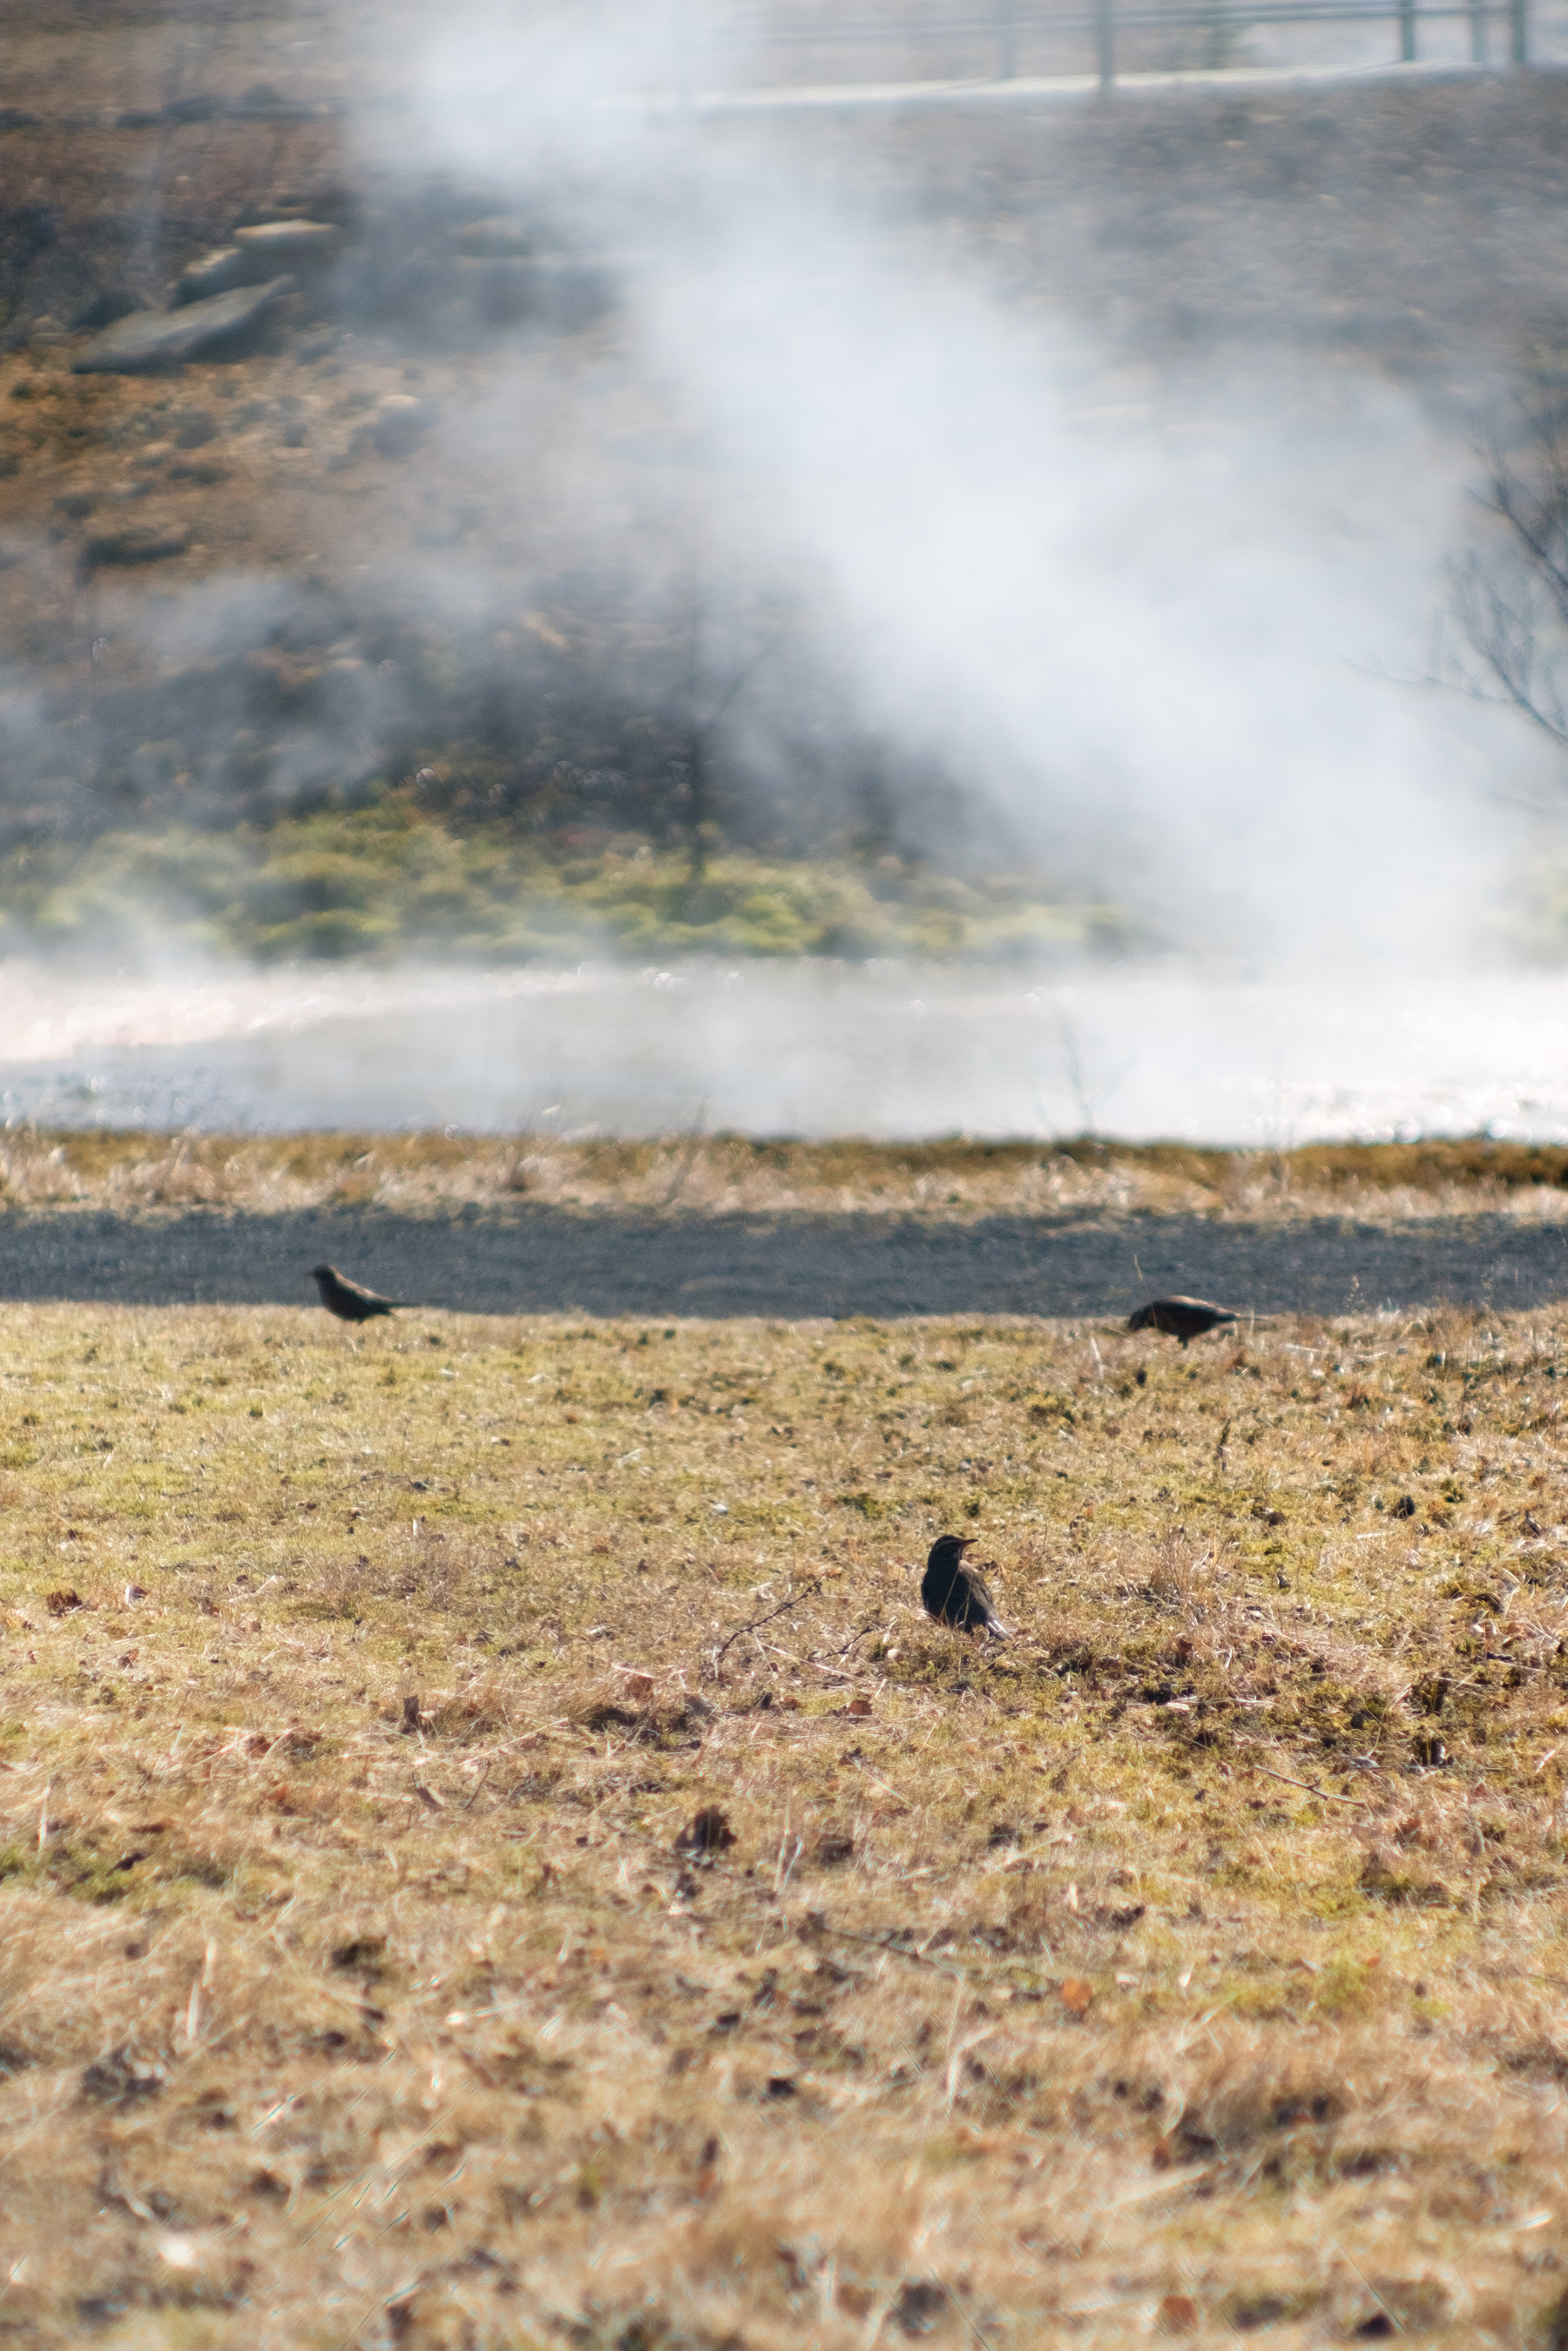 Three redwings, a bird of the thrush type, look for food in the grass close to a geothermal hot spring. Steam rises in the background.